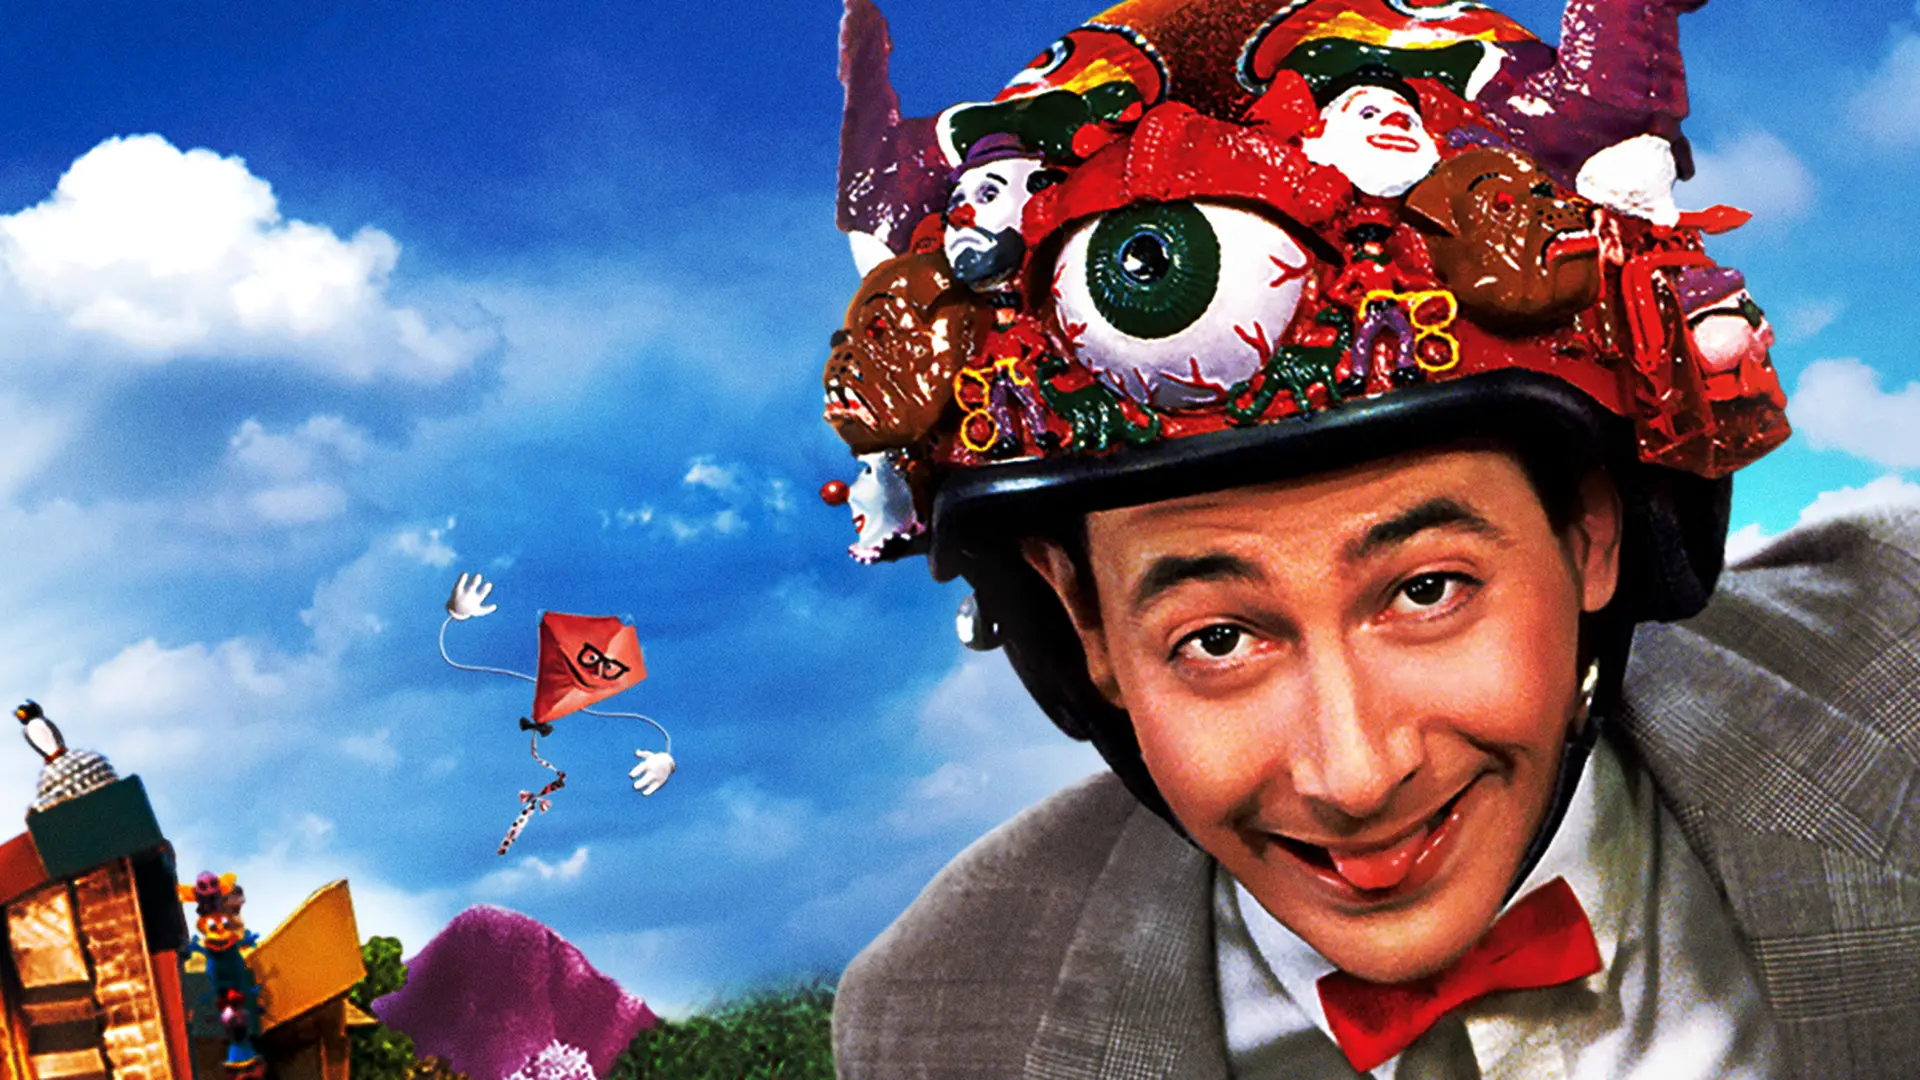 All 5 Seasons of Pee Wee’s Playhouse Are Now Streaming on Tubi